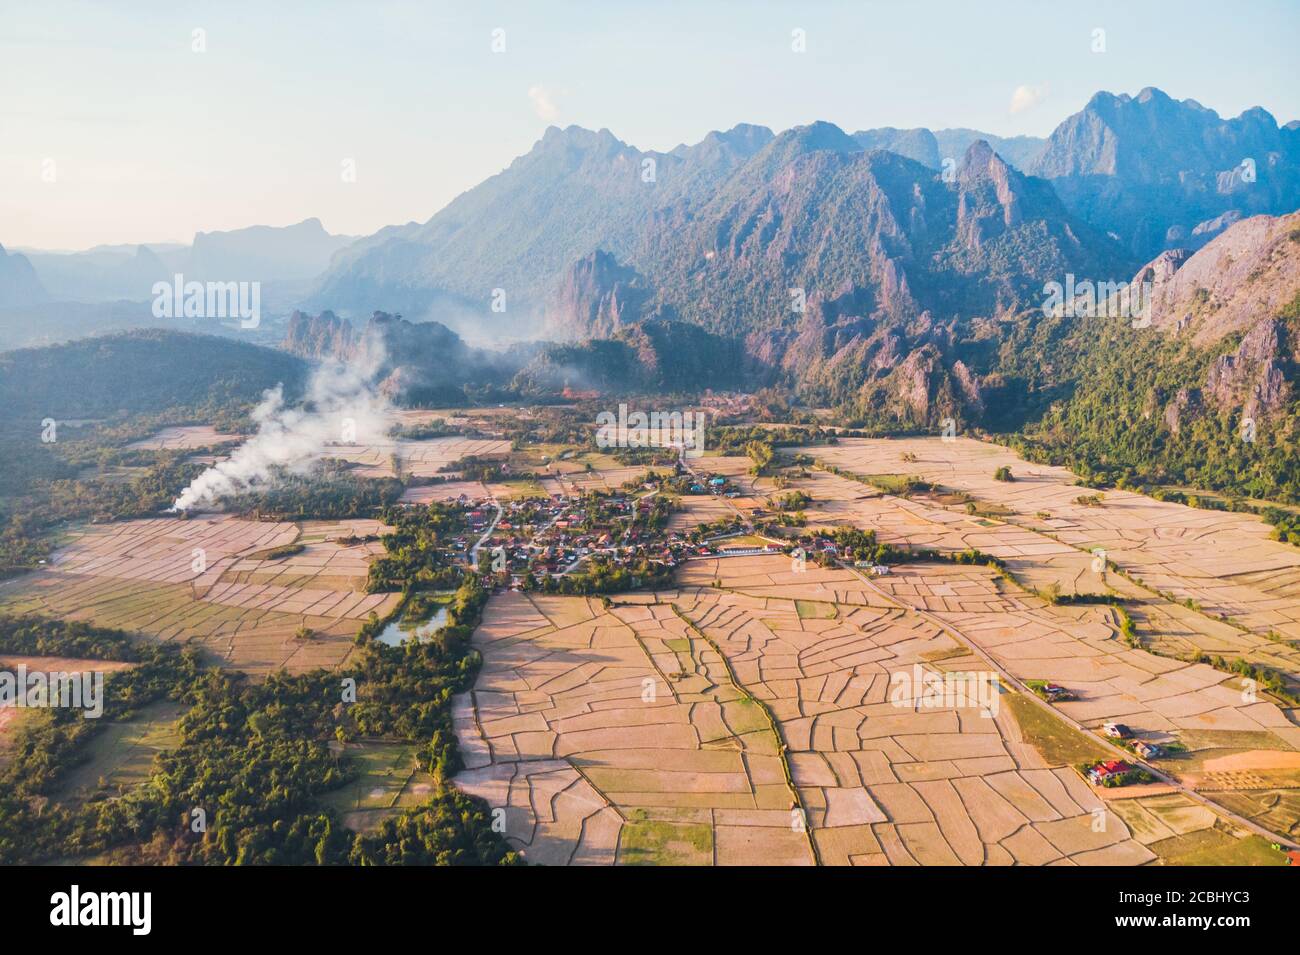 Nature image of Vang Vieng. a famous Landscape in Vang Vieng, Vientiane Province, Beautiful view from the air to the rice fields among the mountains. Stock Photo